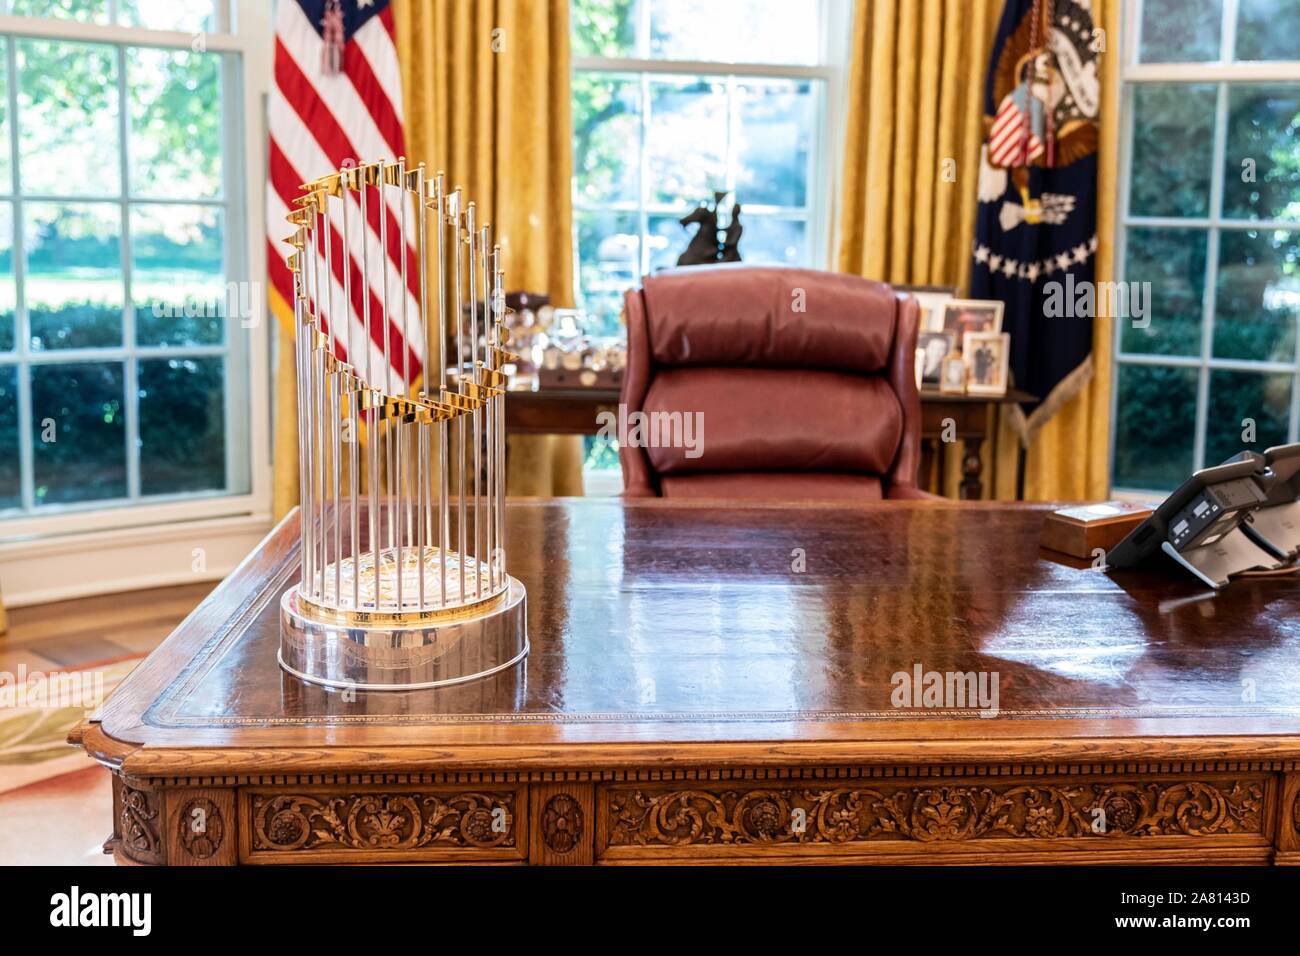 Washington, United States of America. 04 November, 2019. The World Series Baseball trophy is displayed on the Resolute Desk inside the Oval Office of the White House November 4, 2019 in Washington, DC. U.S. President Donald Trump hosted the 2019 Championship Washington Nationals for a victory celebration at the White House.   Credit: Shealah Craighead/White House Photo/Alamy Live News Stock Photo